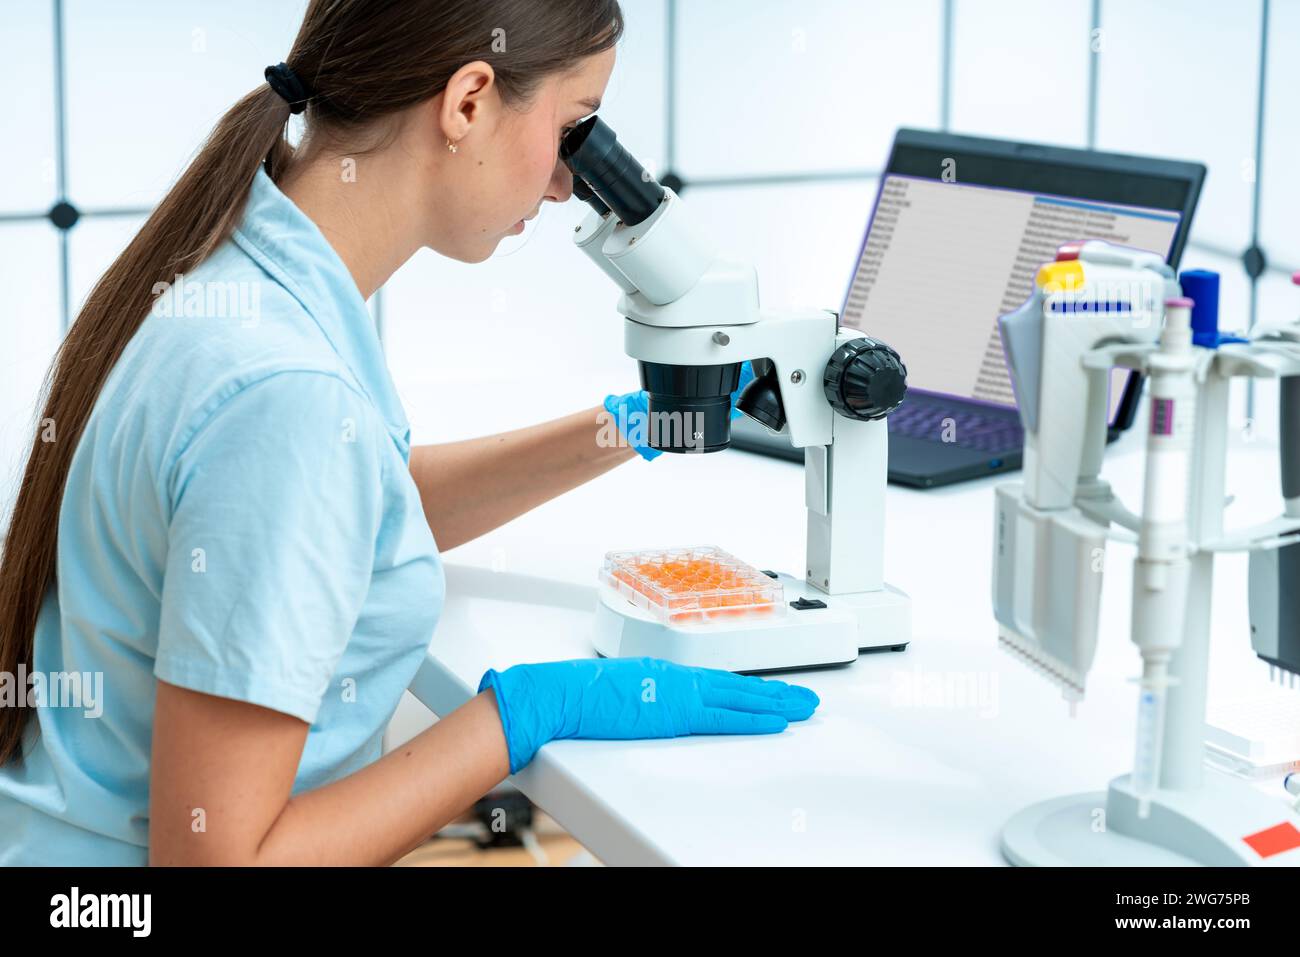 Infection Studies: Infection studies in genetic research involve exposing cells to viruses or other pathogens to study host-pathogen interactions. 24 Stock Photo